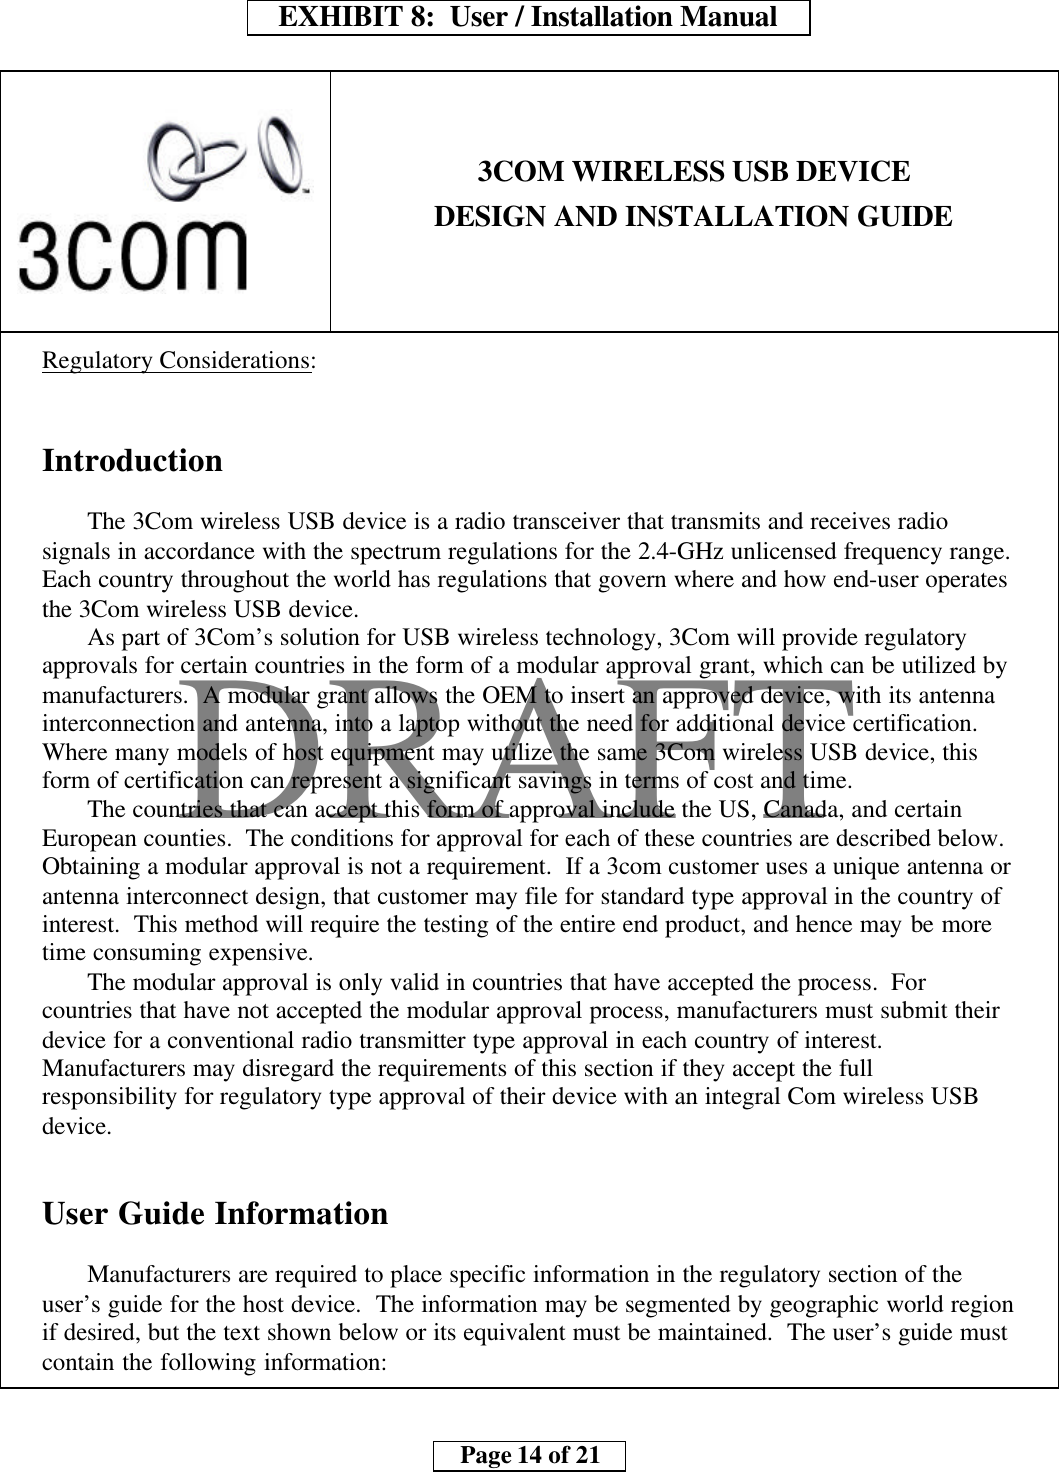     EXHIBIT 8:  User / Installation Manual        Page 14 of 21    DRAFT3COM WIRELESS USB DEVICEDESIGN AND INSTALLATION GUIDERegulatory Considerations:IntroductionThe 3Com wireless USB device is a radio transceiver that transmits and receives radiosignals in accordance with the spectrum regulations for the 2.4-GHz unlicensed frequency range.Each country throughout the world has regulations that govern where and how end-user operatesthe 3Com wireless USB device.As part of 3Com’s solution for USB wireless technology, 3Com will provide regulatoryapprovals for certain countries in the form of a modular approval grant, which can be utilized bymanufacturers.  A modular grant allows the OEM to insert an approved device, with its antennainterconnection and antenna, into a laptop without the need for additional device certification.Where many models of host equipment may utilize the same 3Com wireless USB device, thisform of certification can represent a significant savings in terms of cost and time.The countries that can accept this form of approval include the US, Canada, and certainEuropean counties.  The conditions for approval for each of these countries are described below.Obtaining a modular approval is not a requirement.  If a 3com customer uses a unique antenna orantenna interconnect design, that customer may file for standard type approval in the country ofinterest.  This method will require the testing of the entire end product, and hence may be moretime consuming expensive.The modular approval is only valid in countries that have accepted the process.  Forcountries that have not accepted the modular approval process, manufacturers must submit theirdevice for a conventional radio transmitter type approval in each country of interest.Manufacturers may disregard the requirements of this section if they accept the fullresponsibility for regulatory type approval of their device with an integral Com wireless USBdevice.User Guide InformationManufacturers are required to place specific information in the regulatory section of theuser’s guide for the host device.  The information may be segmented by geographic world regionif desired, but the text shown below or its equivalent must be maintained.  The user’s guide mustcontain the following information: